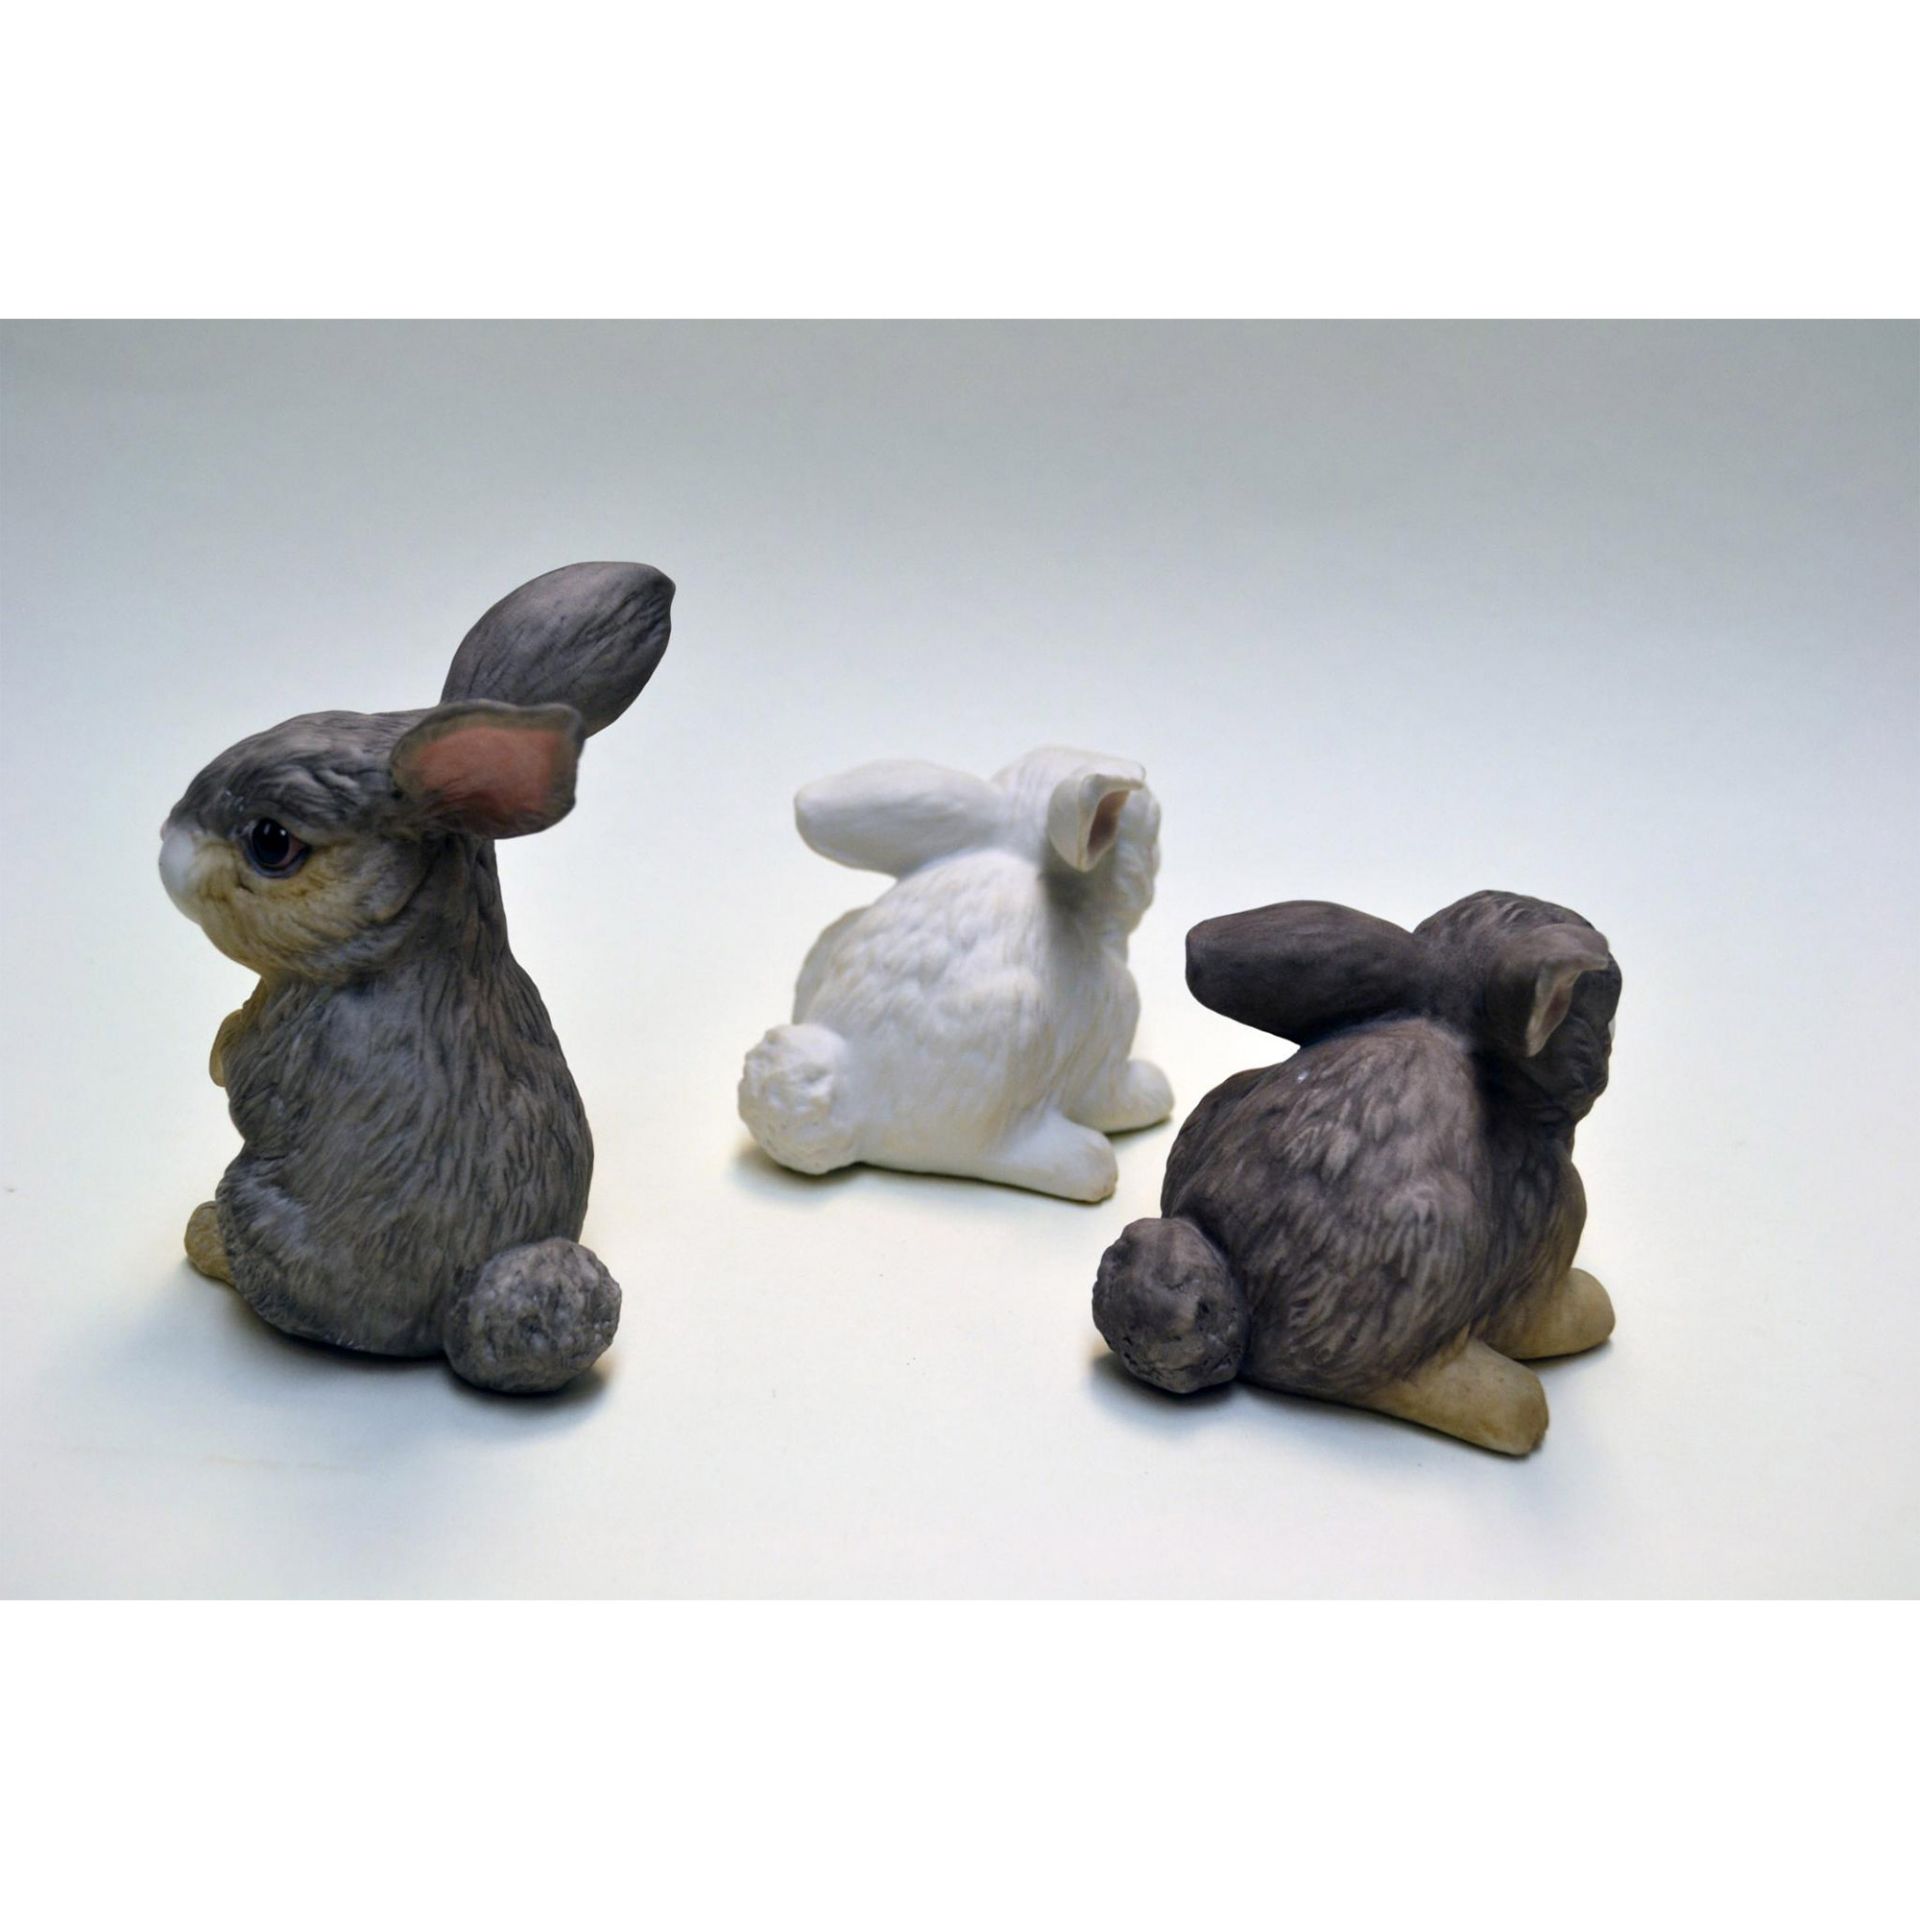 Boehm Porcelain Rabbits, Sitting And At Rest, White & Wild Figurines, 3 Pcs - Image 3 of 6